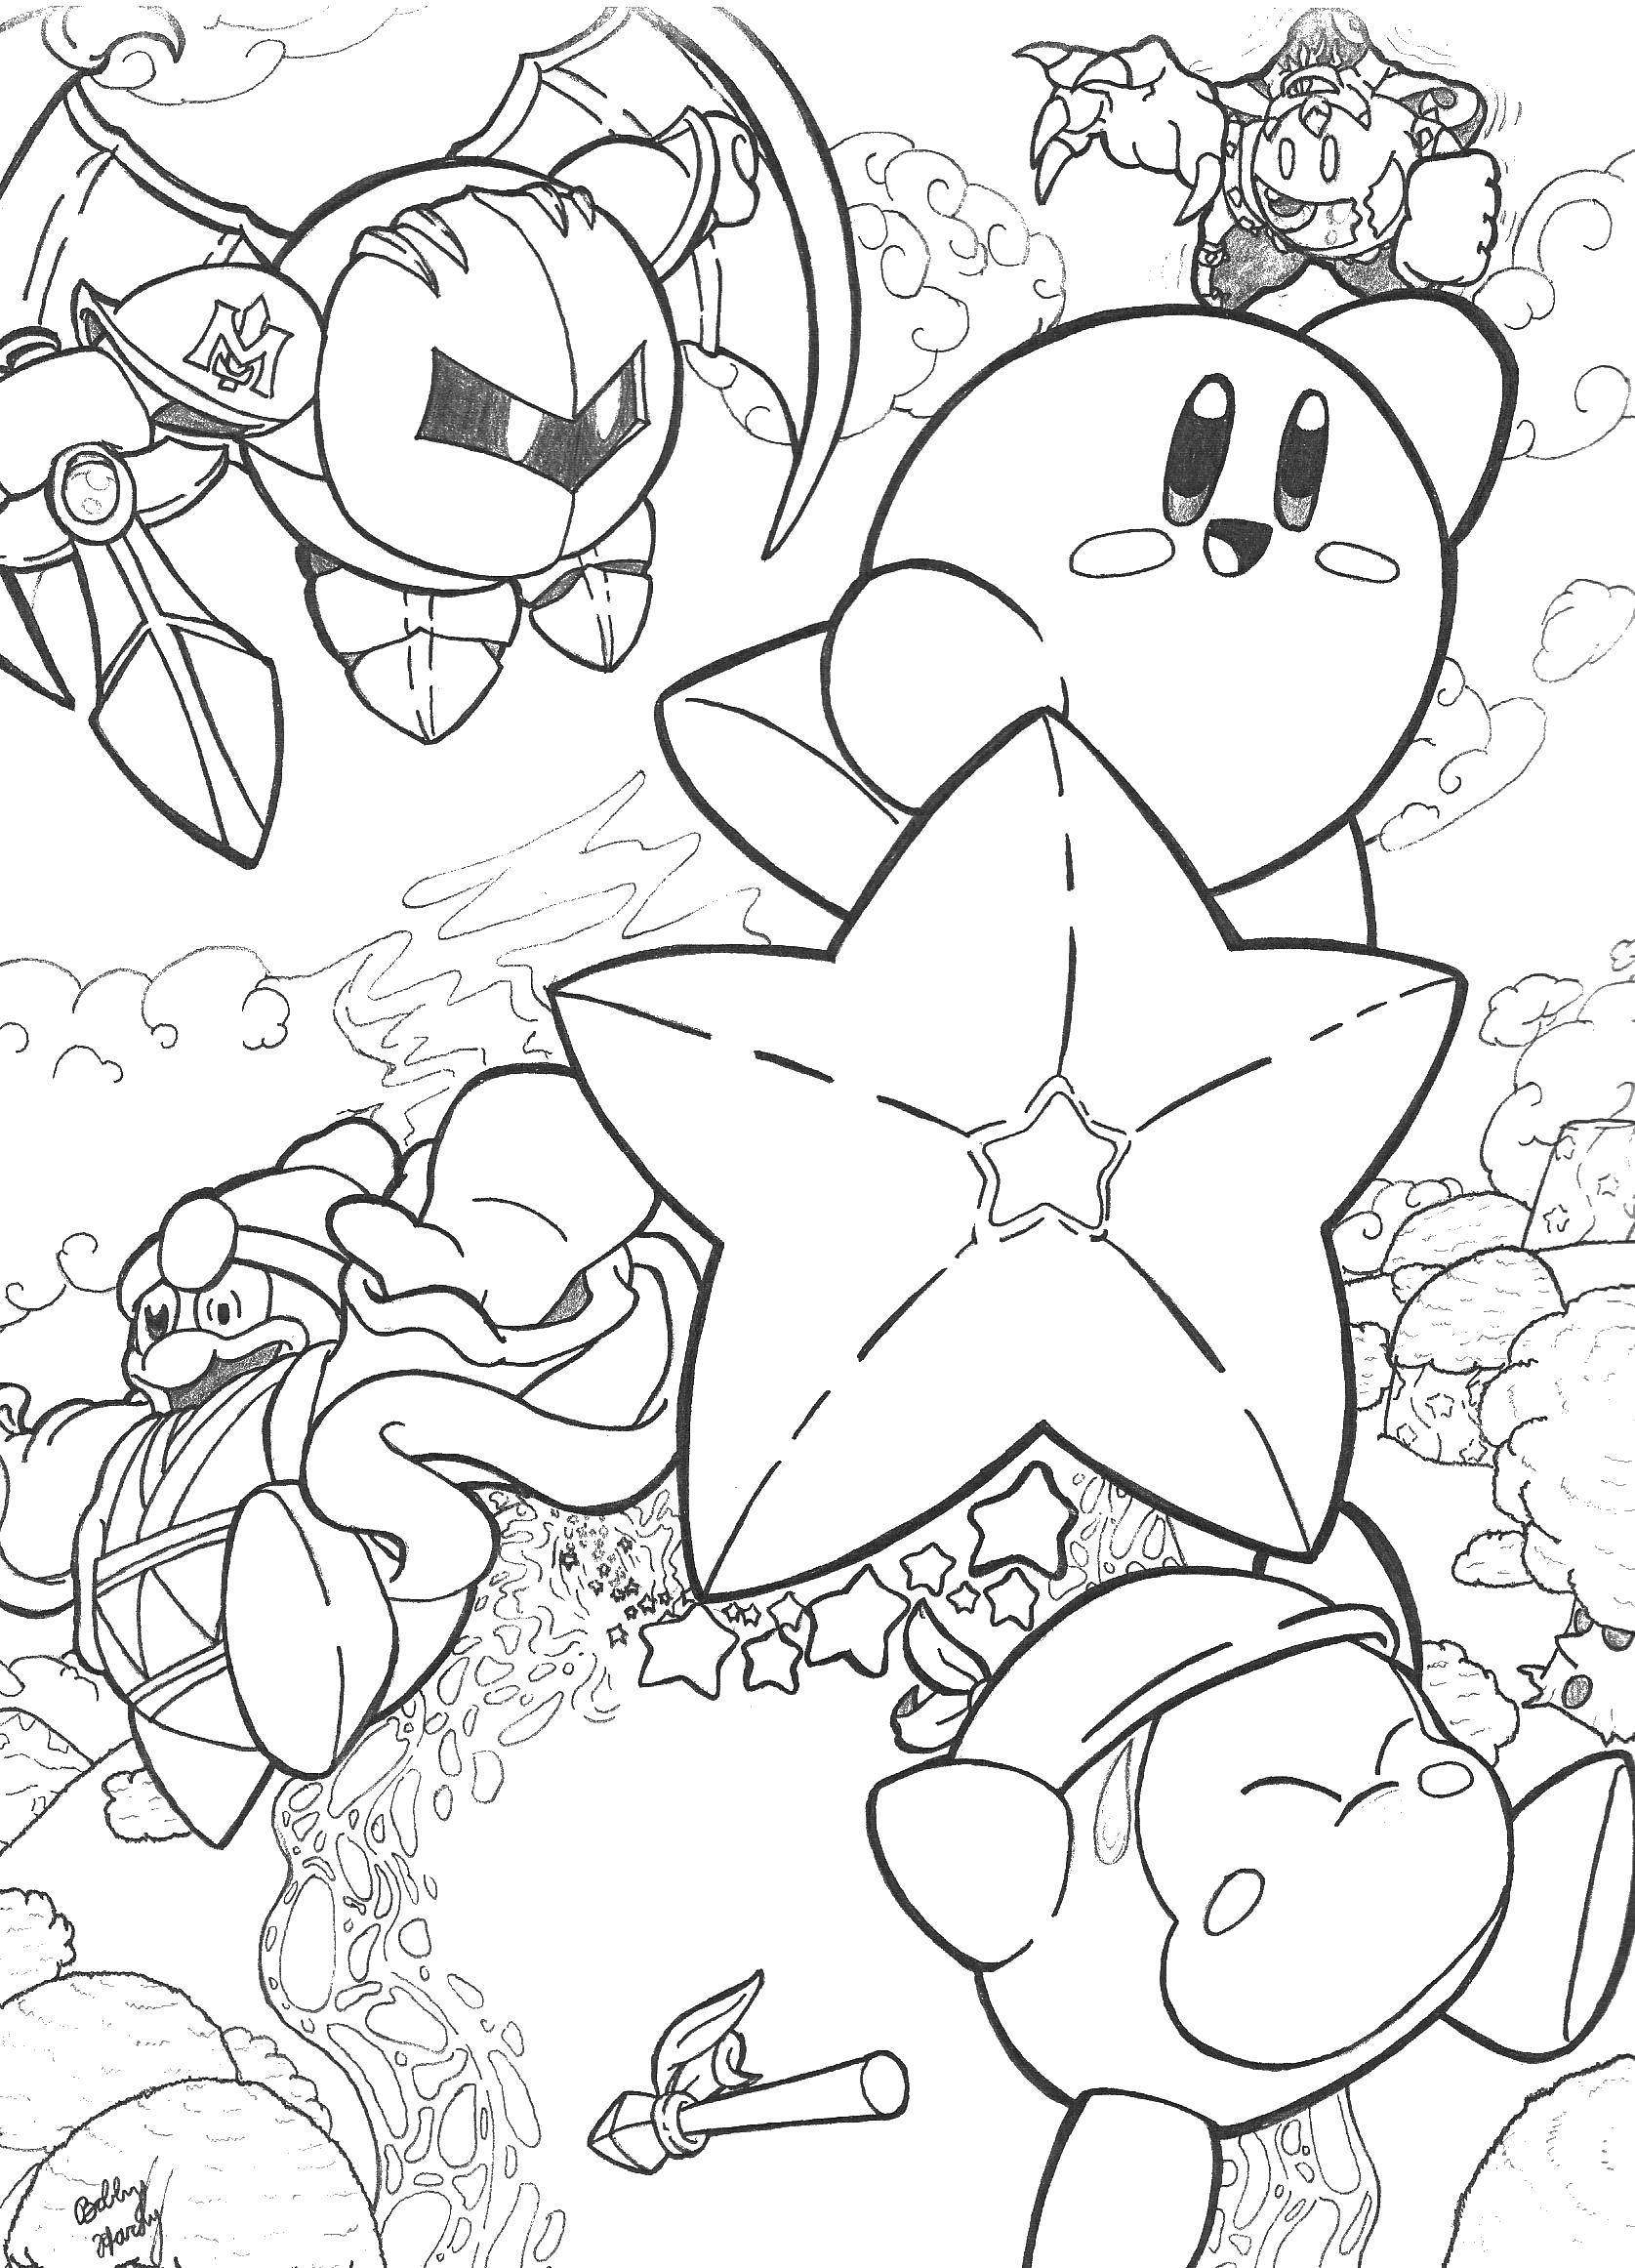 Coloring The heroes of the game Kirby. Category Kirby. Tags:  That Kirby game.